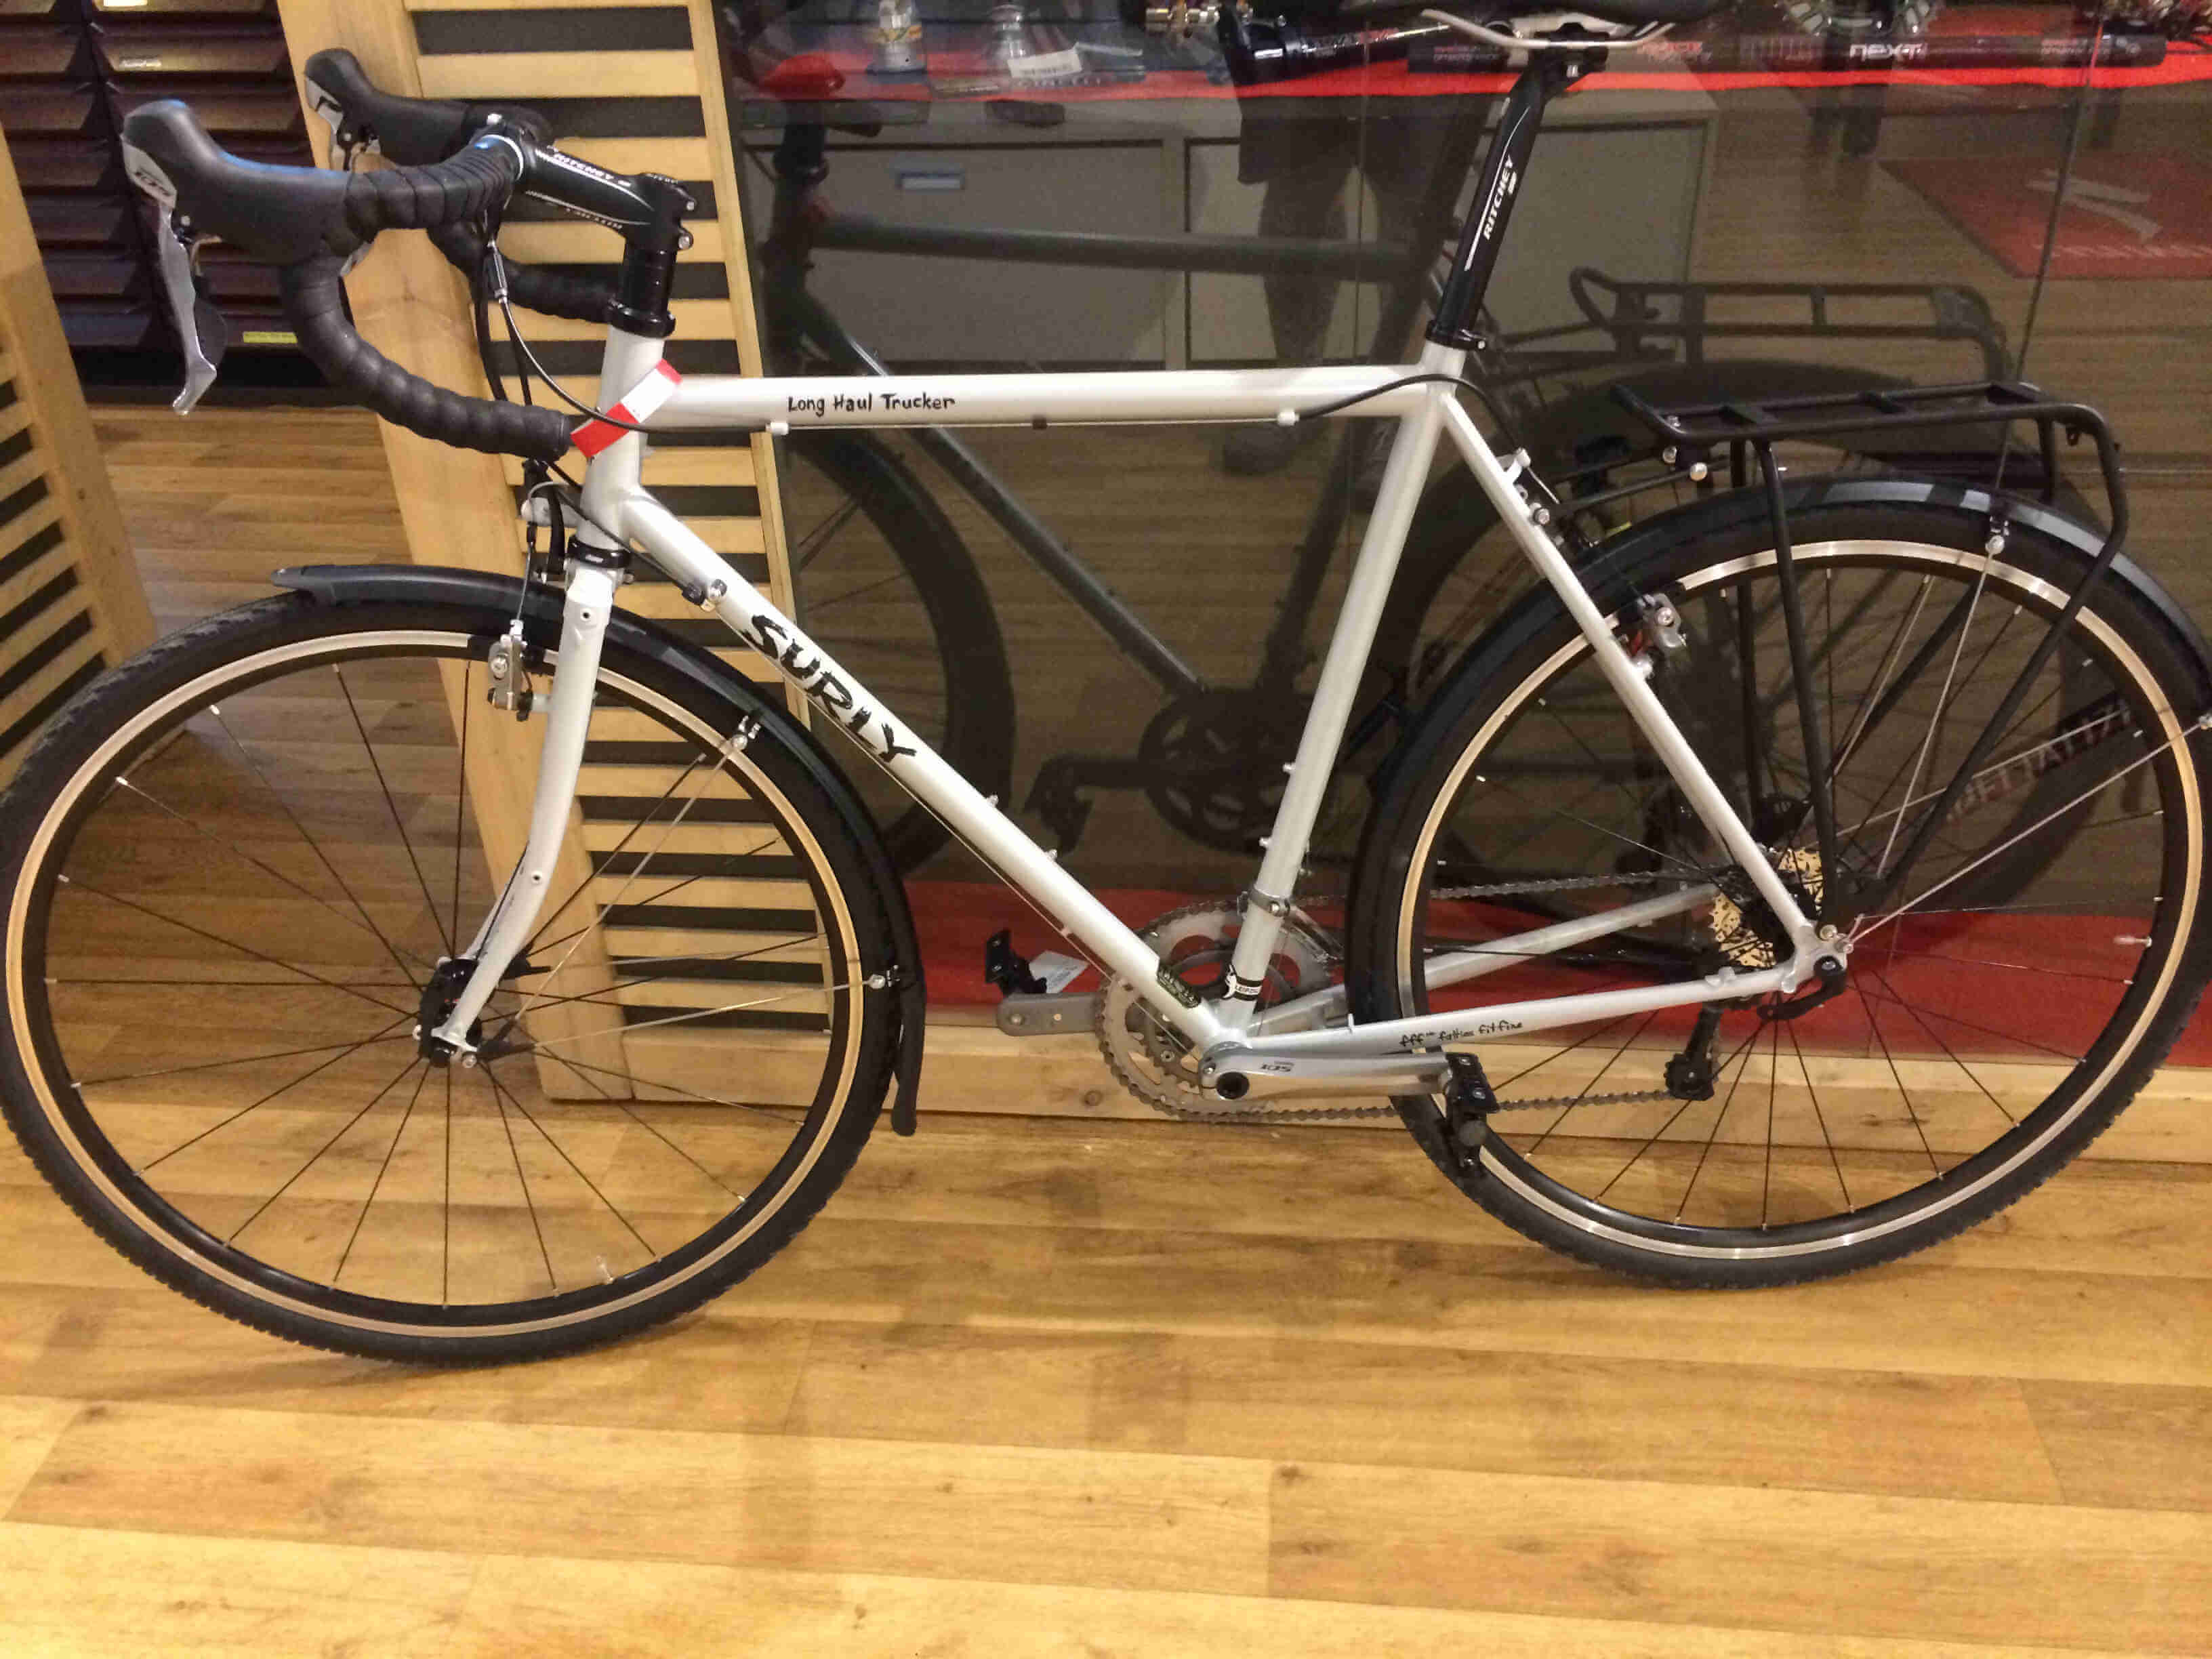 Left side view of a white Surly Long Haul Trucker bike, leaning against side of a glass store counter, on wood floors